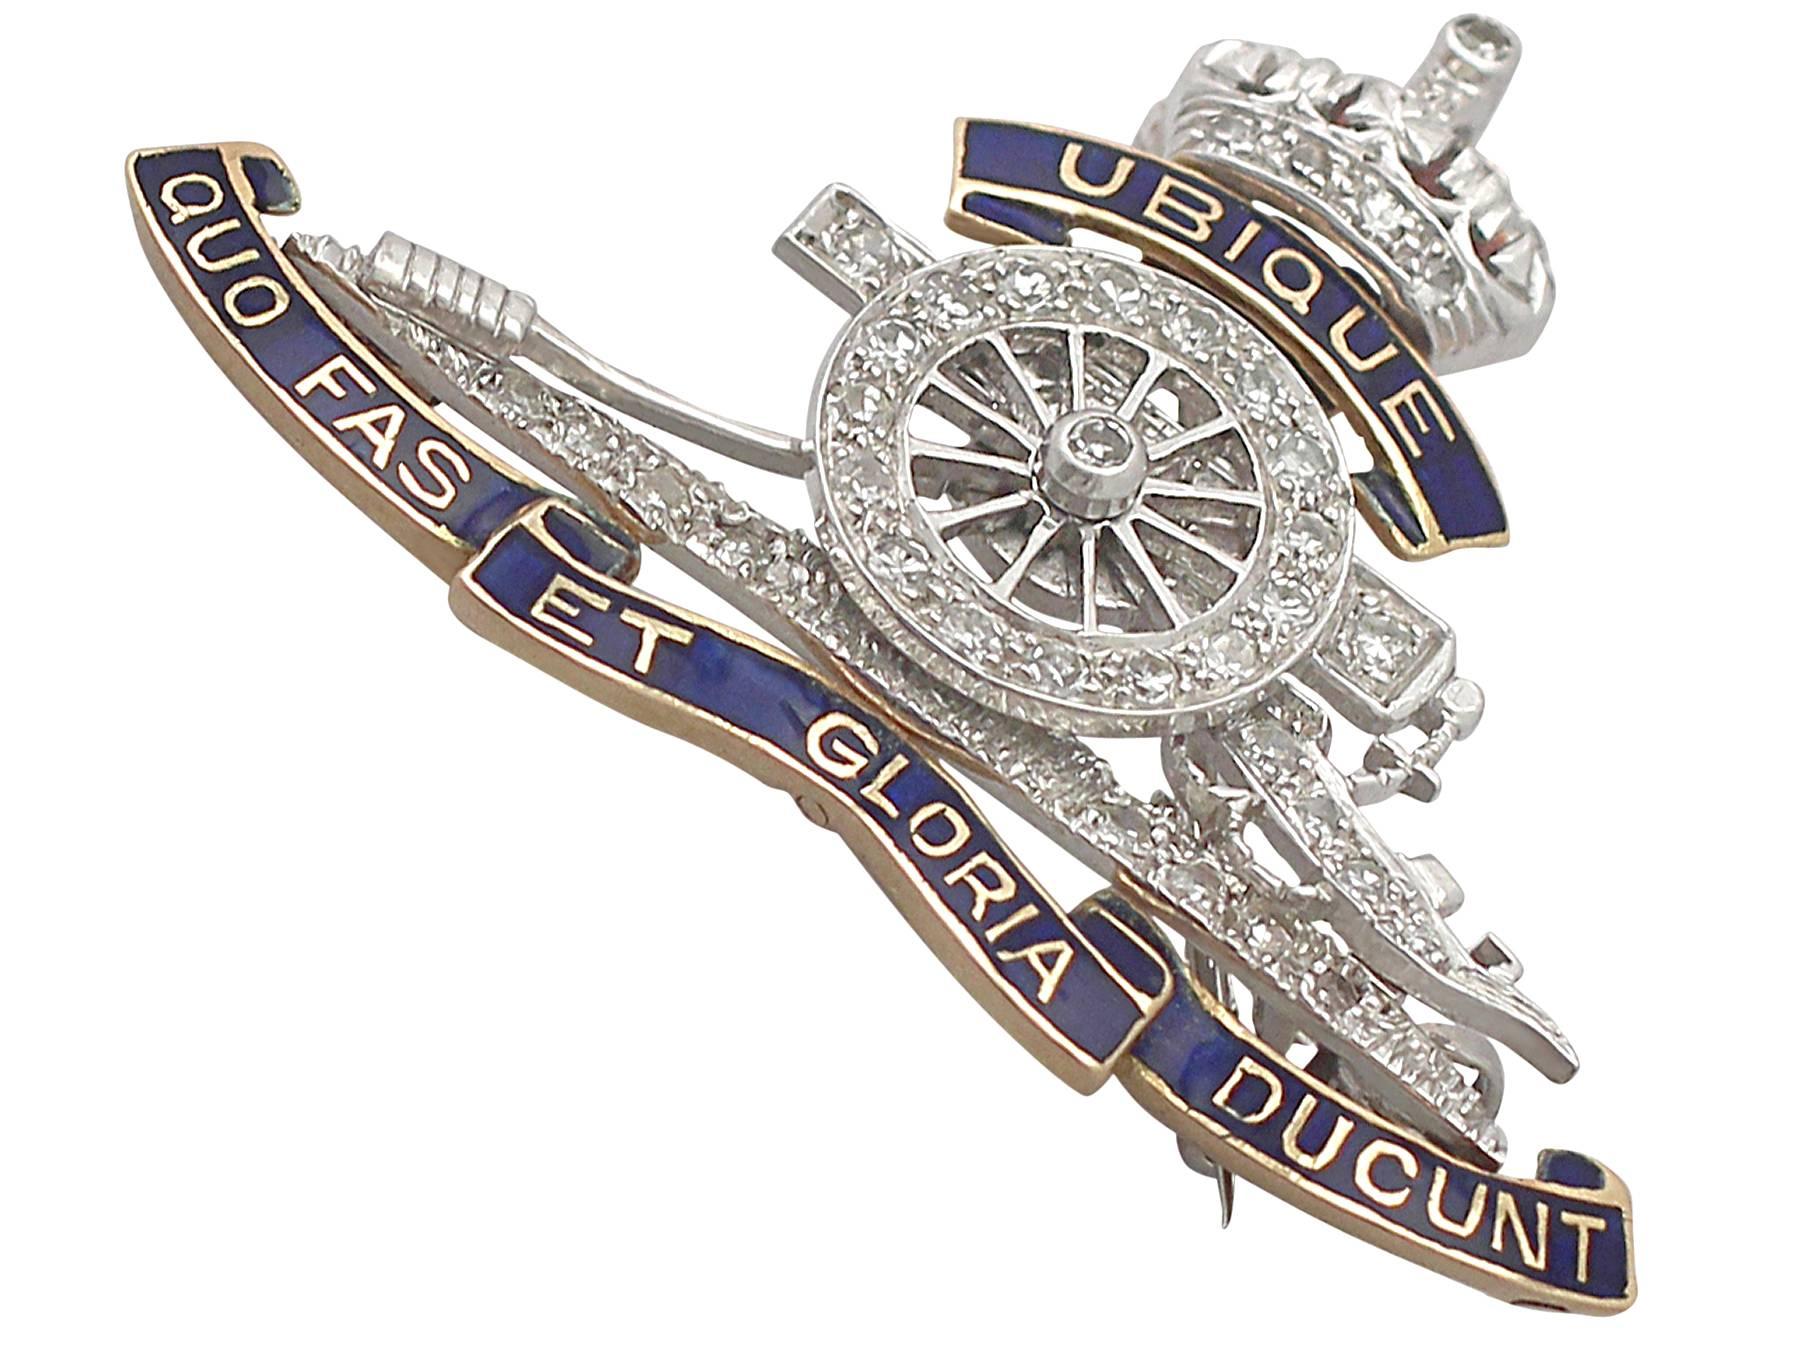 An exceptional and original antique 0.60 carat diamond and enamel, platinum and 18 karat yellow gold, Royal Regiment of Artillery sweetheart brooch; part of our antique jewelry and estate jewelry collections

This exceptional antique Royal